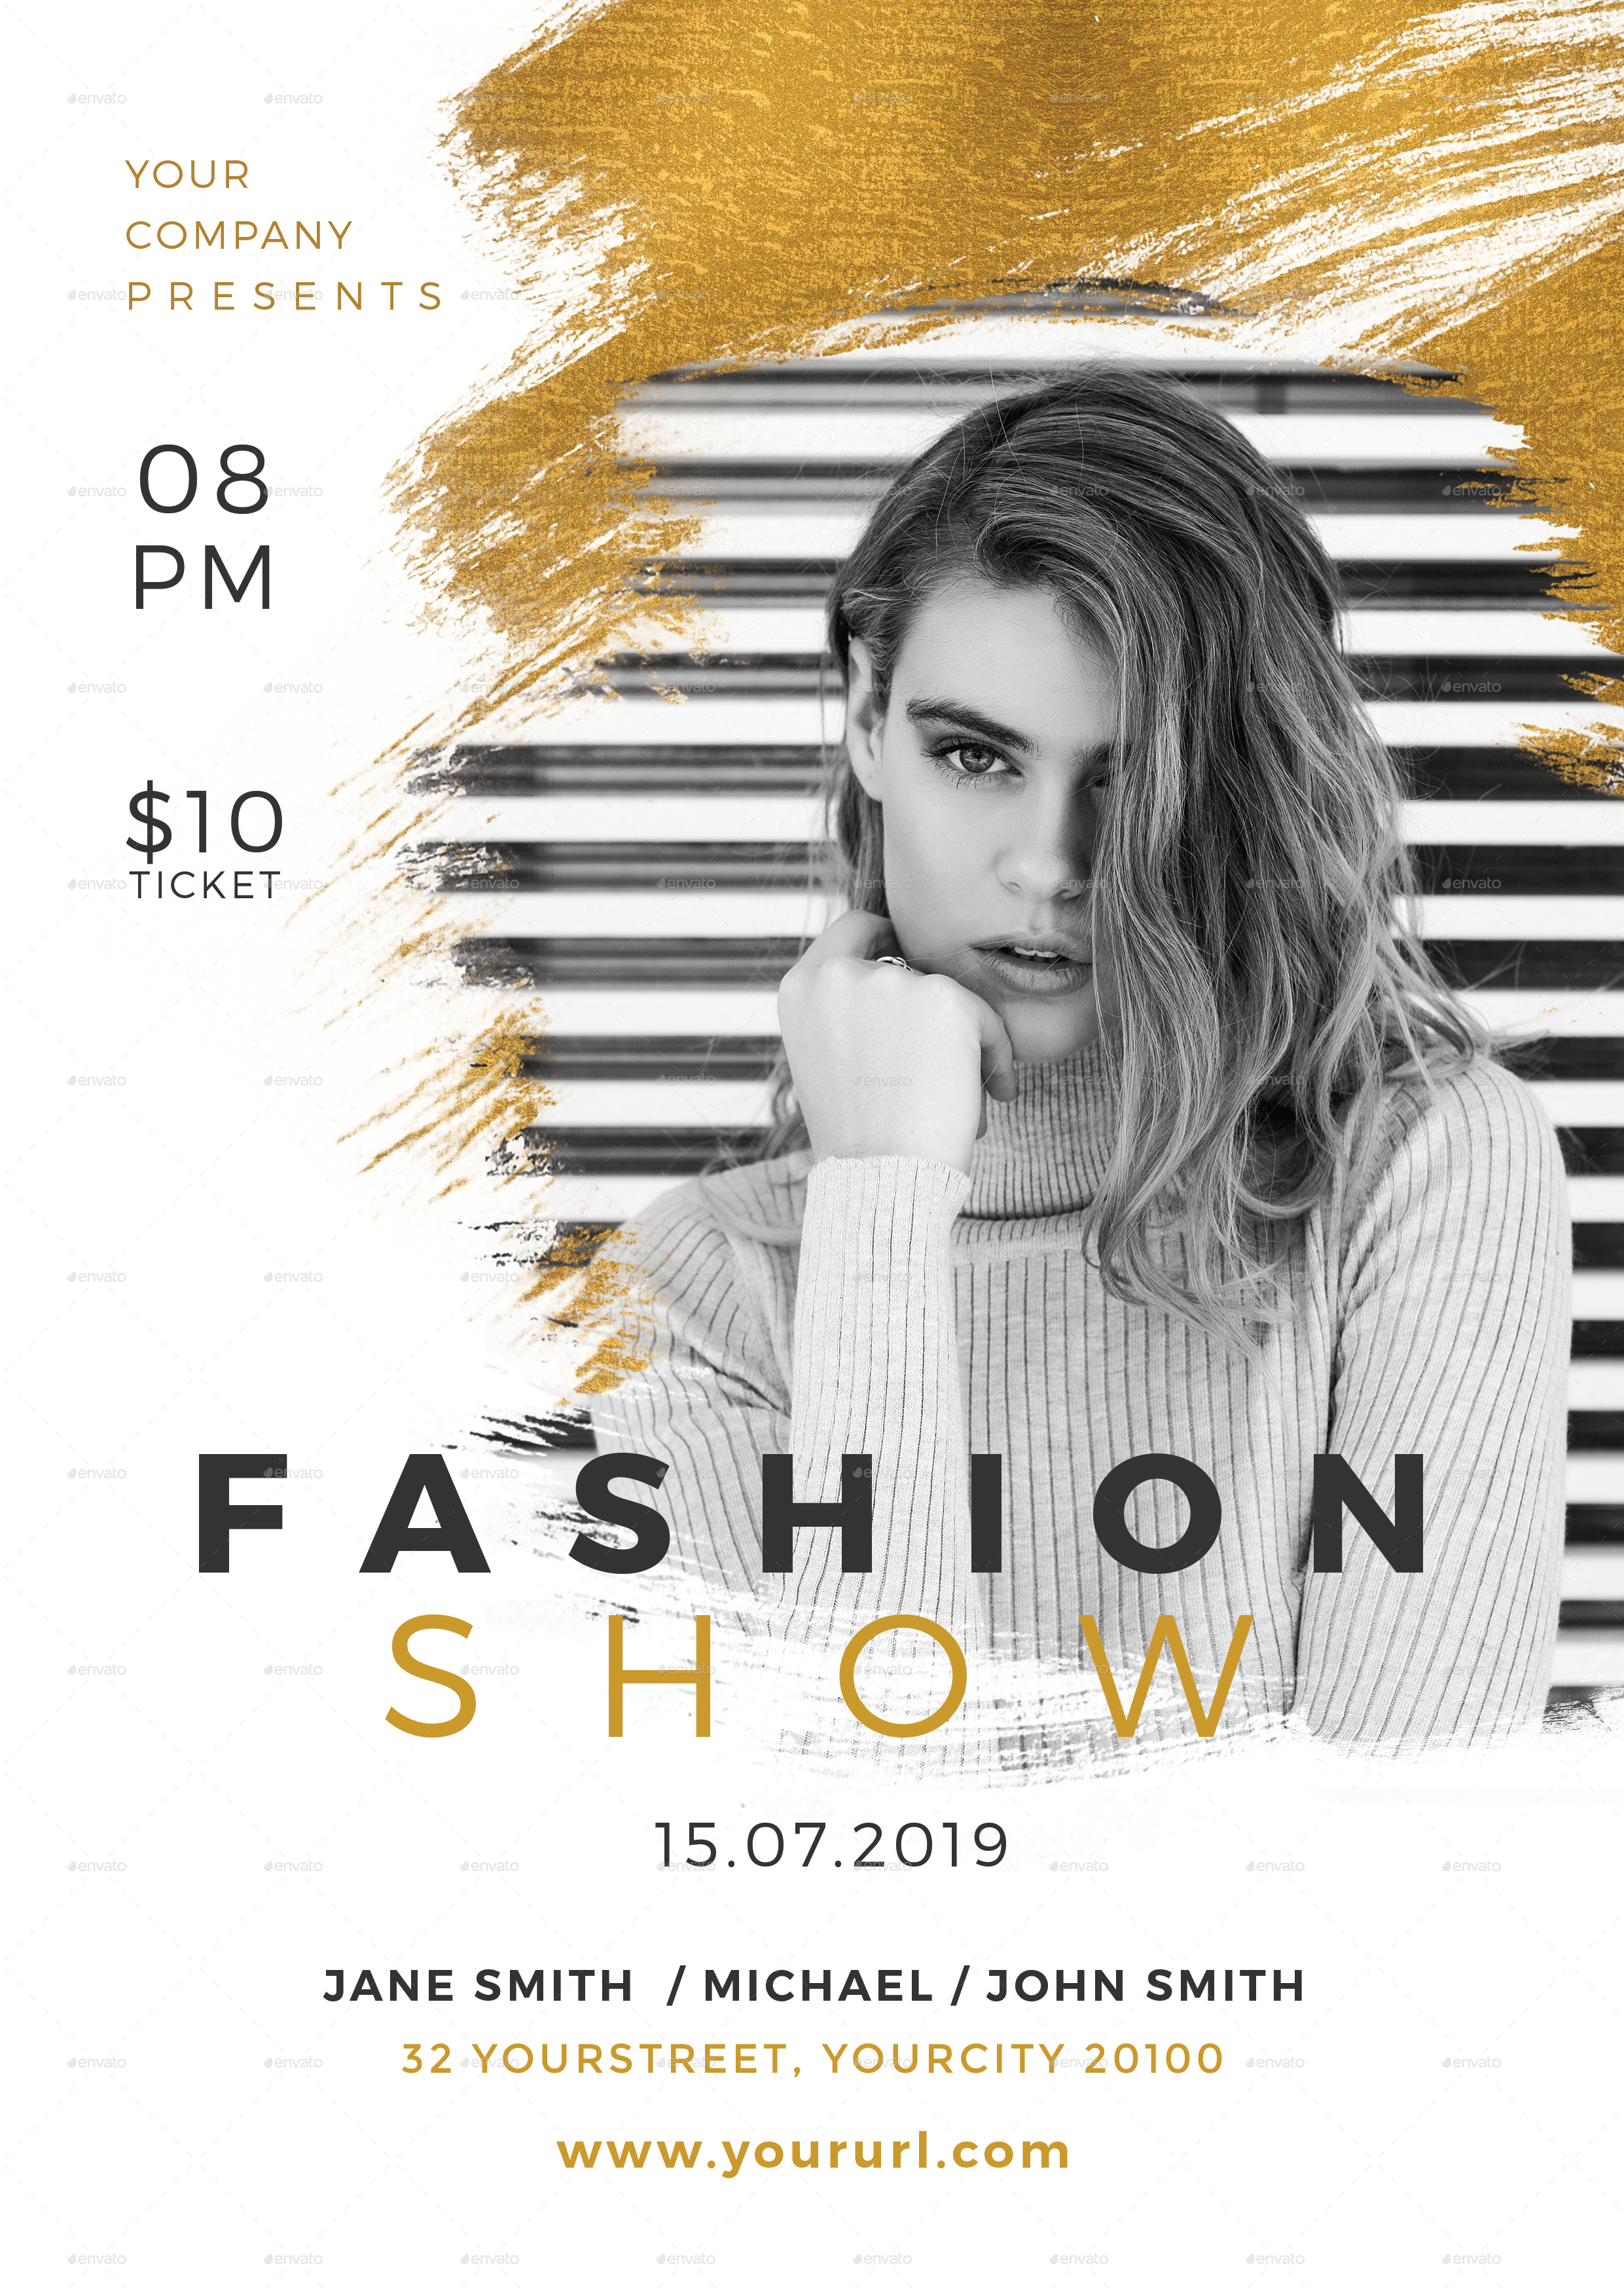 Fashion Show Flyer by infinite78910 | GraphicRiver